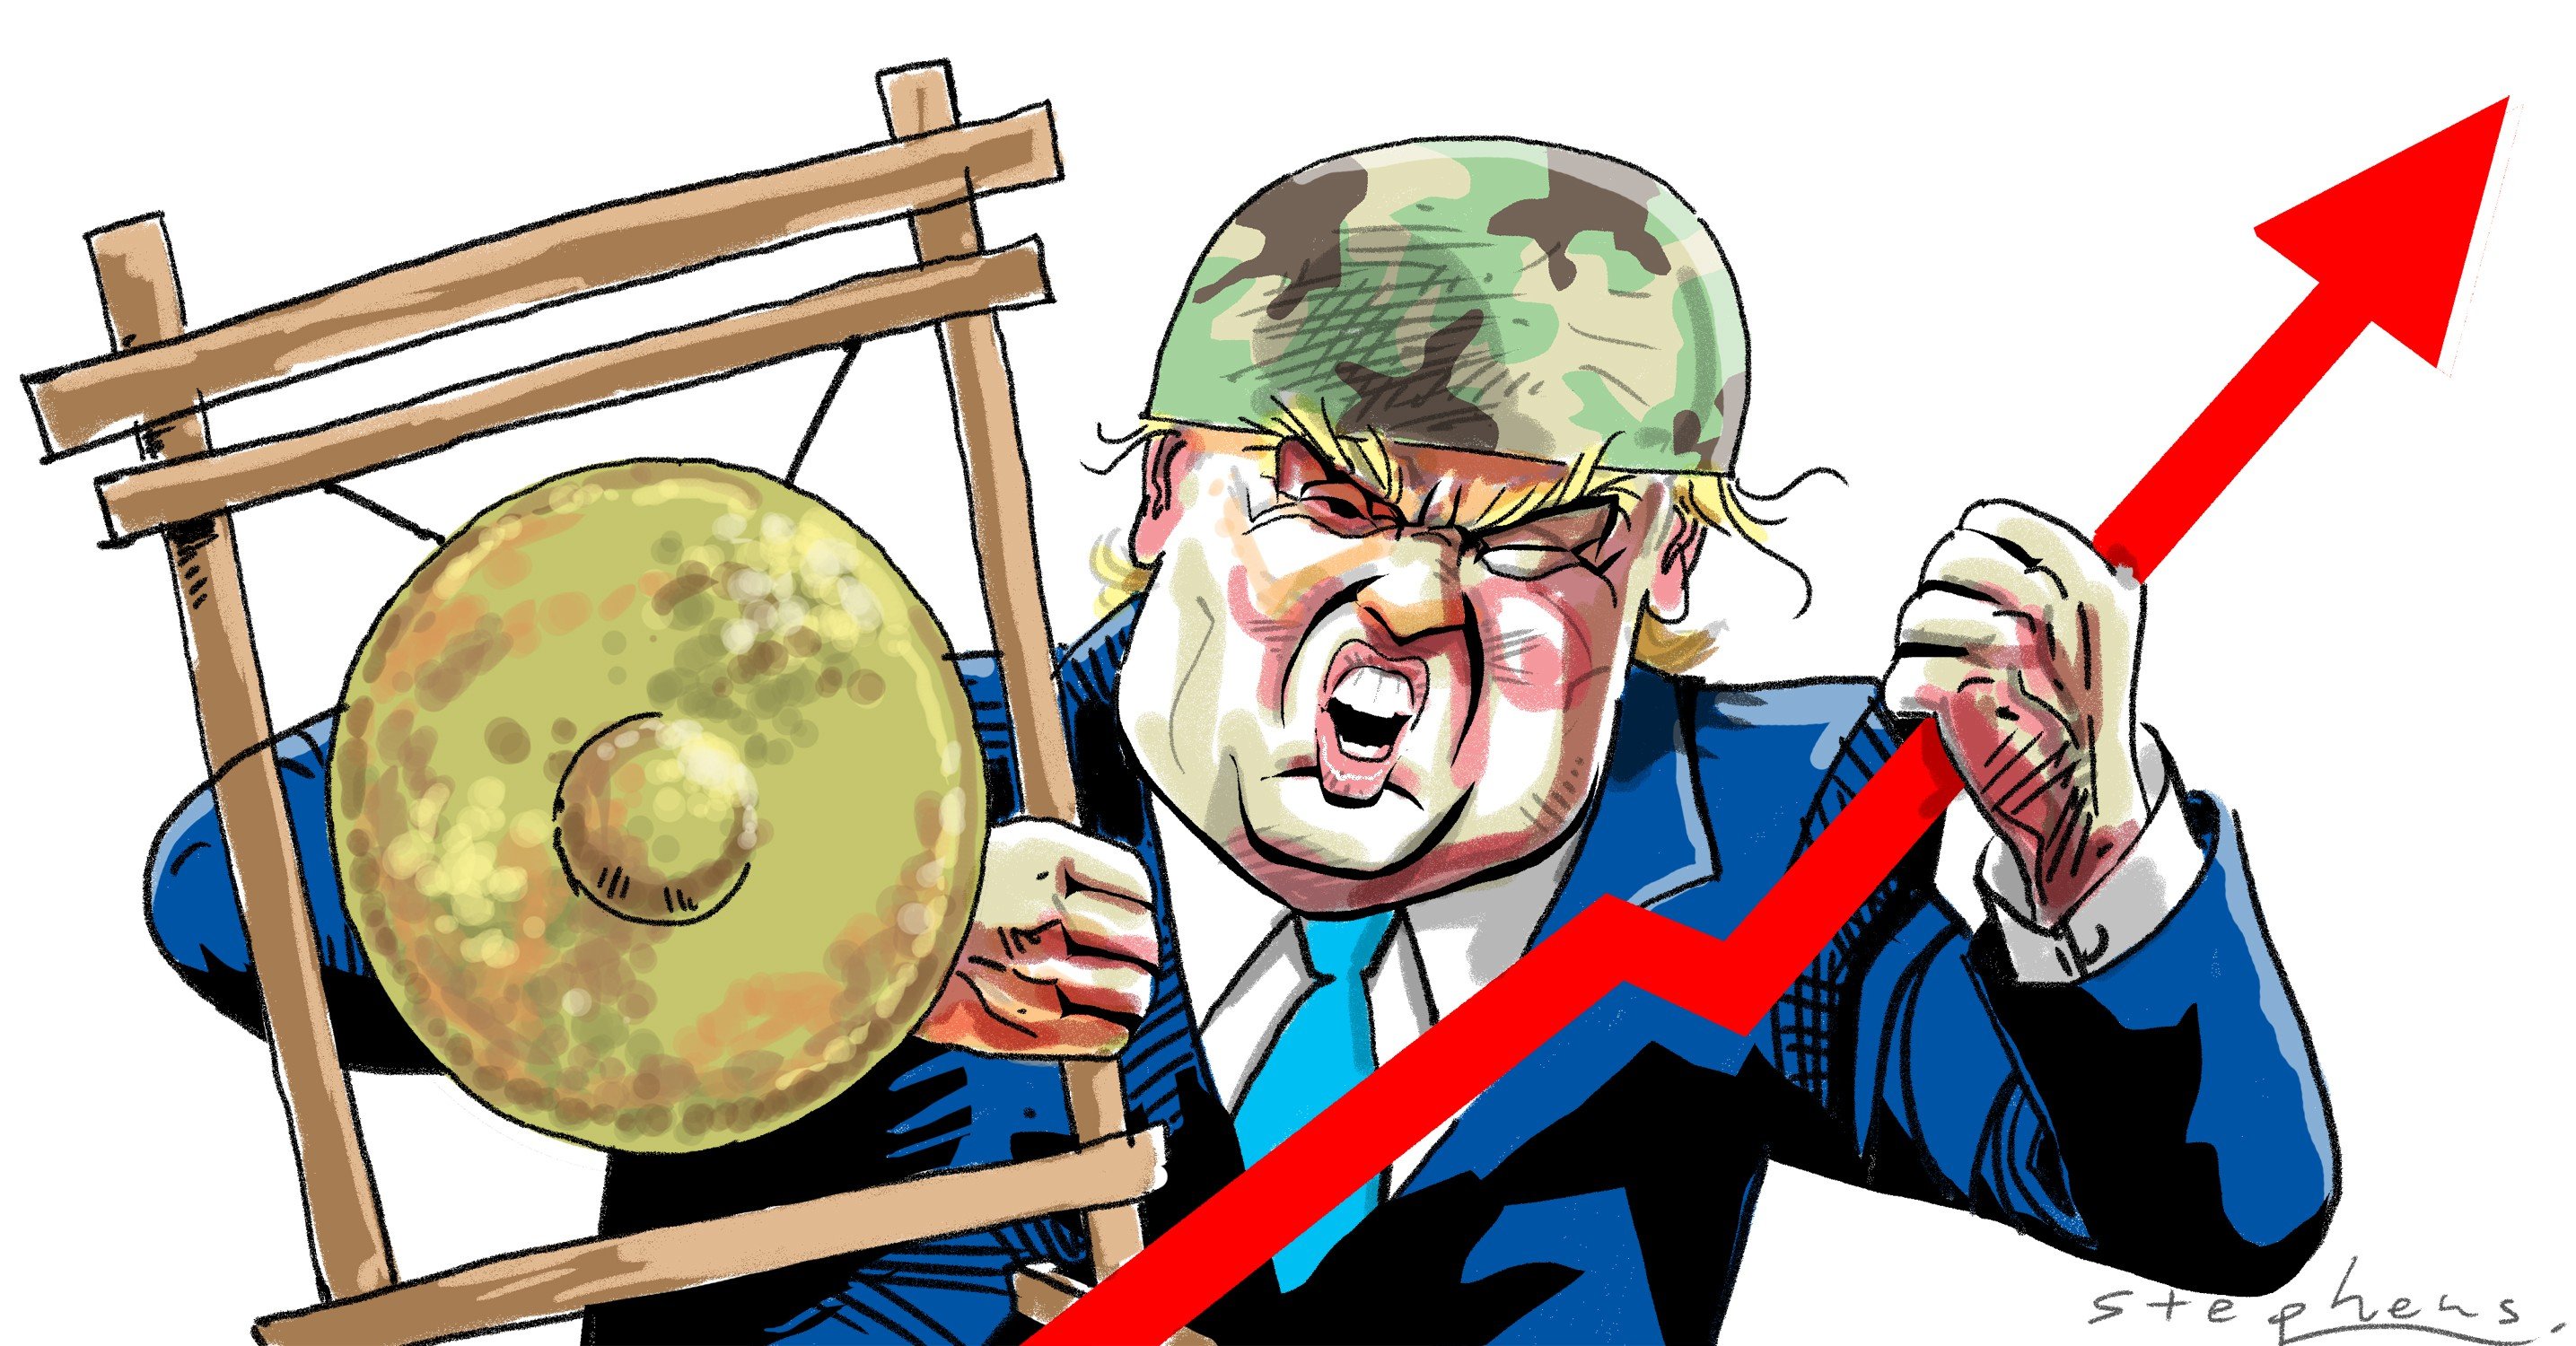 The Trump administration has been moving systematically to put the regulatory pieces in place so it can credibly threaten China with limits on its exports, ­investment and other elements of the relationship. Illustration: Craig Stephens